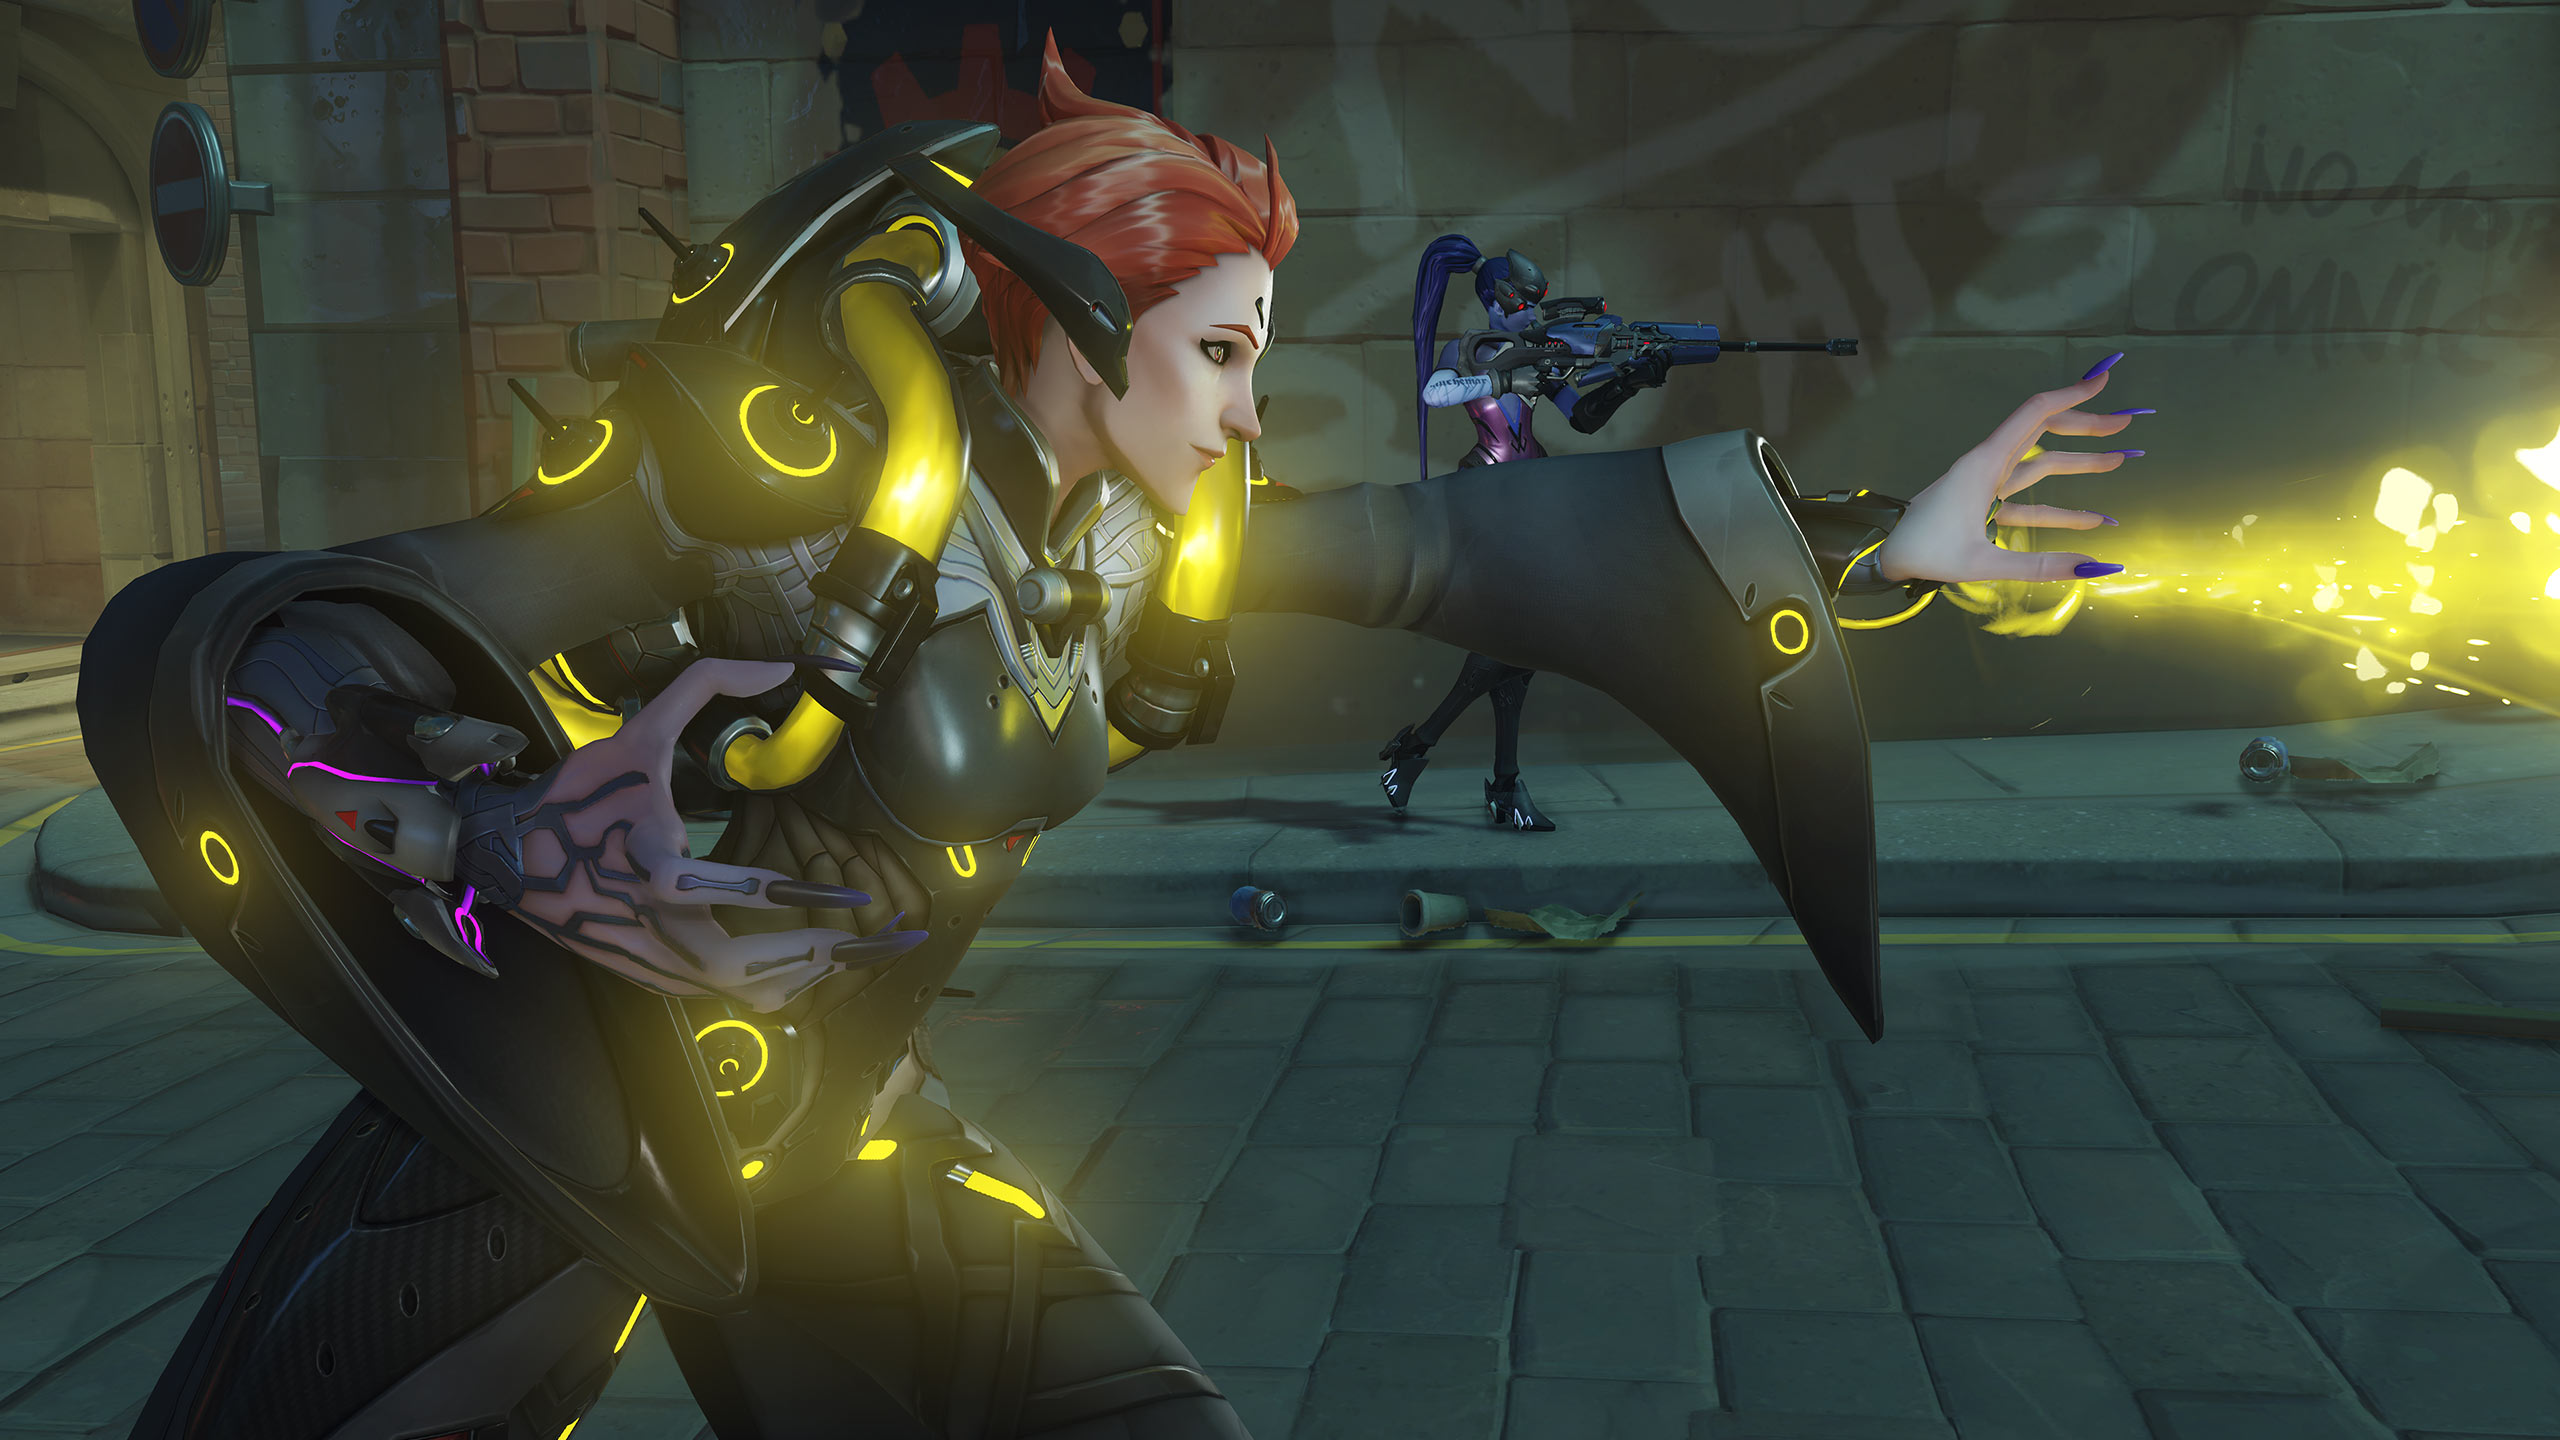 Overwatch’s New Hero Moira Is A Blast To Play, But Comes With A Learning Curve